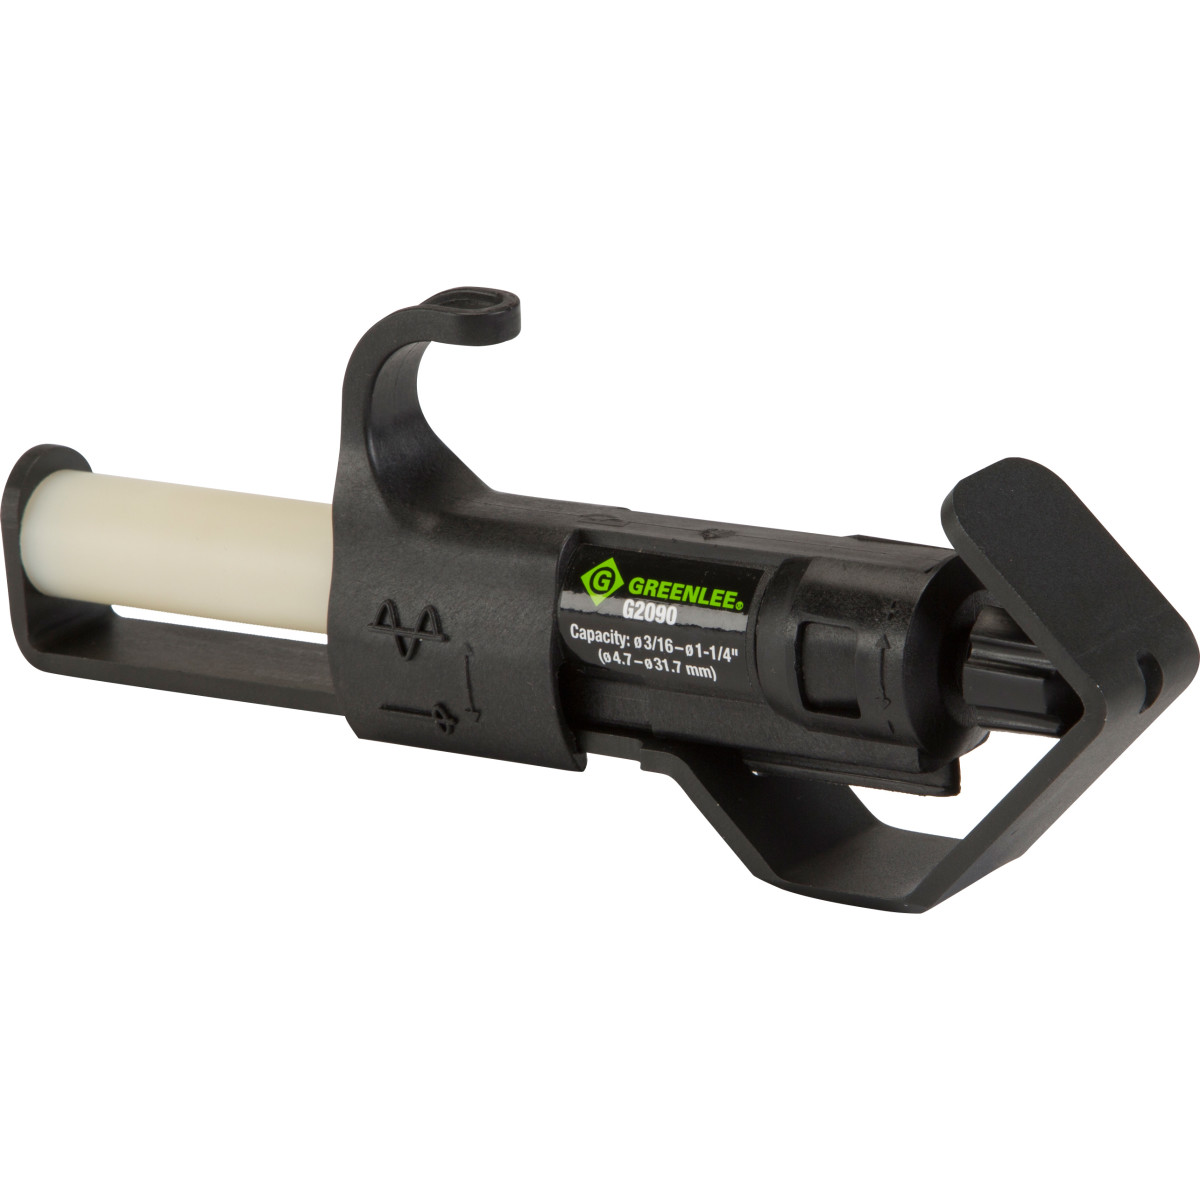 Adjustable Cable Stripping Tool (G2090 Bulk).  Intuitive Blade Design allowing for user to maintain contact with the cable at all times.  Ergonomic jaw plunger.  Cable jacket lifting edge.  Safety factor – Replaces the need to use blades when stripping cable.  Blade lacerations comprise approximately 40 percent of all recordable injuries on the jobsite.